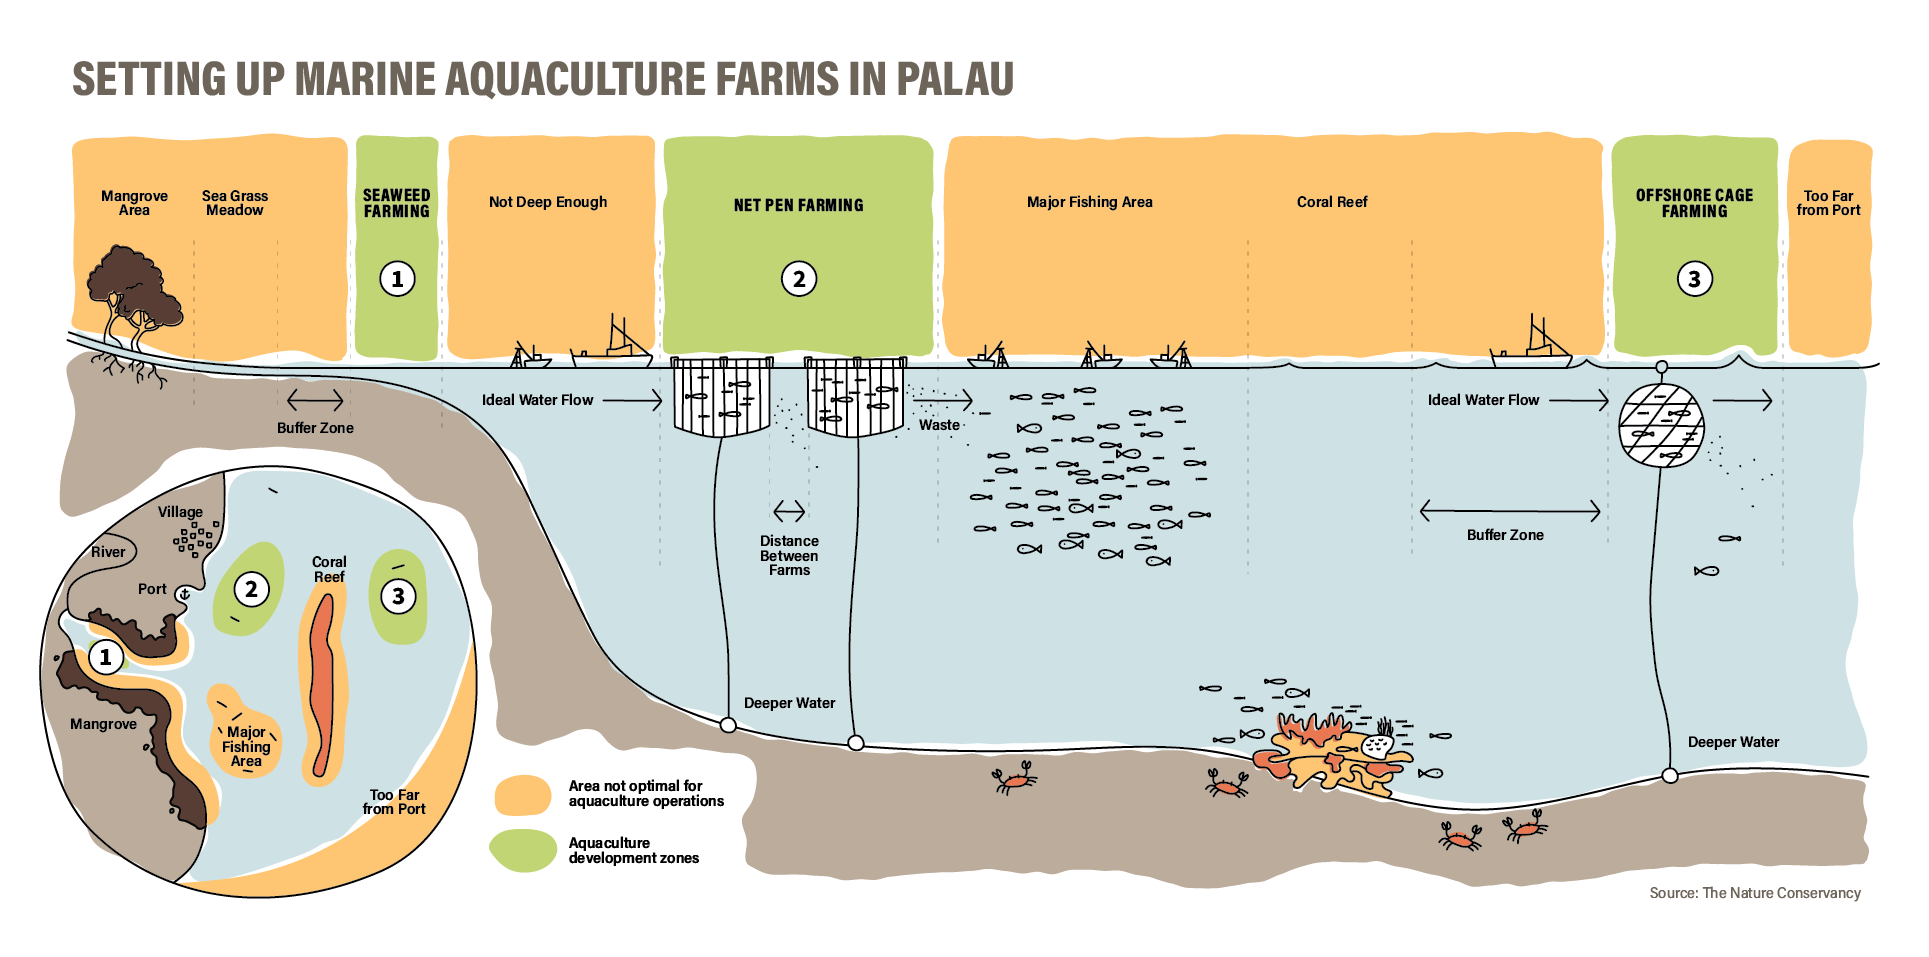 An infographic of how to set up marine aquaculture farms in Palau.